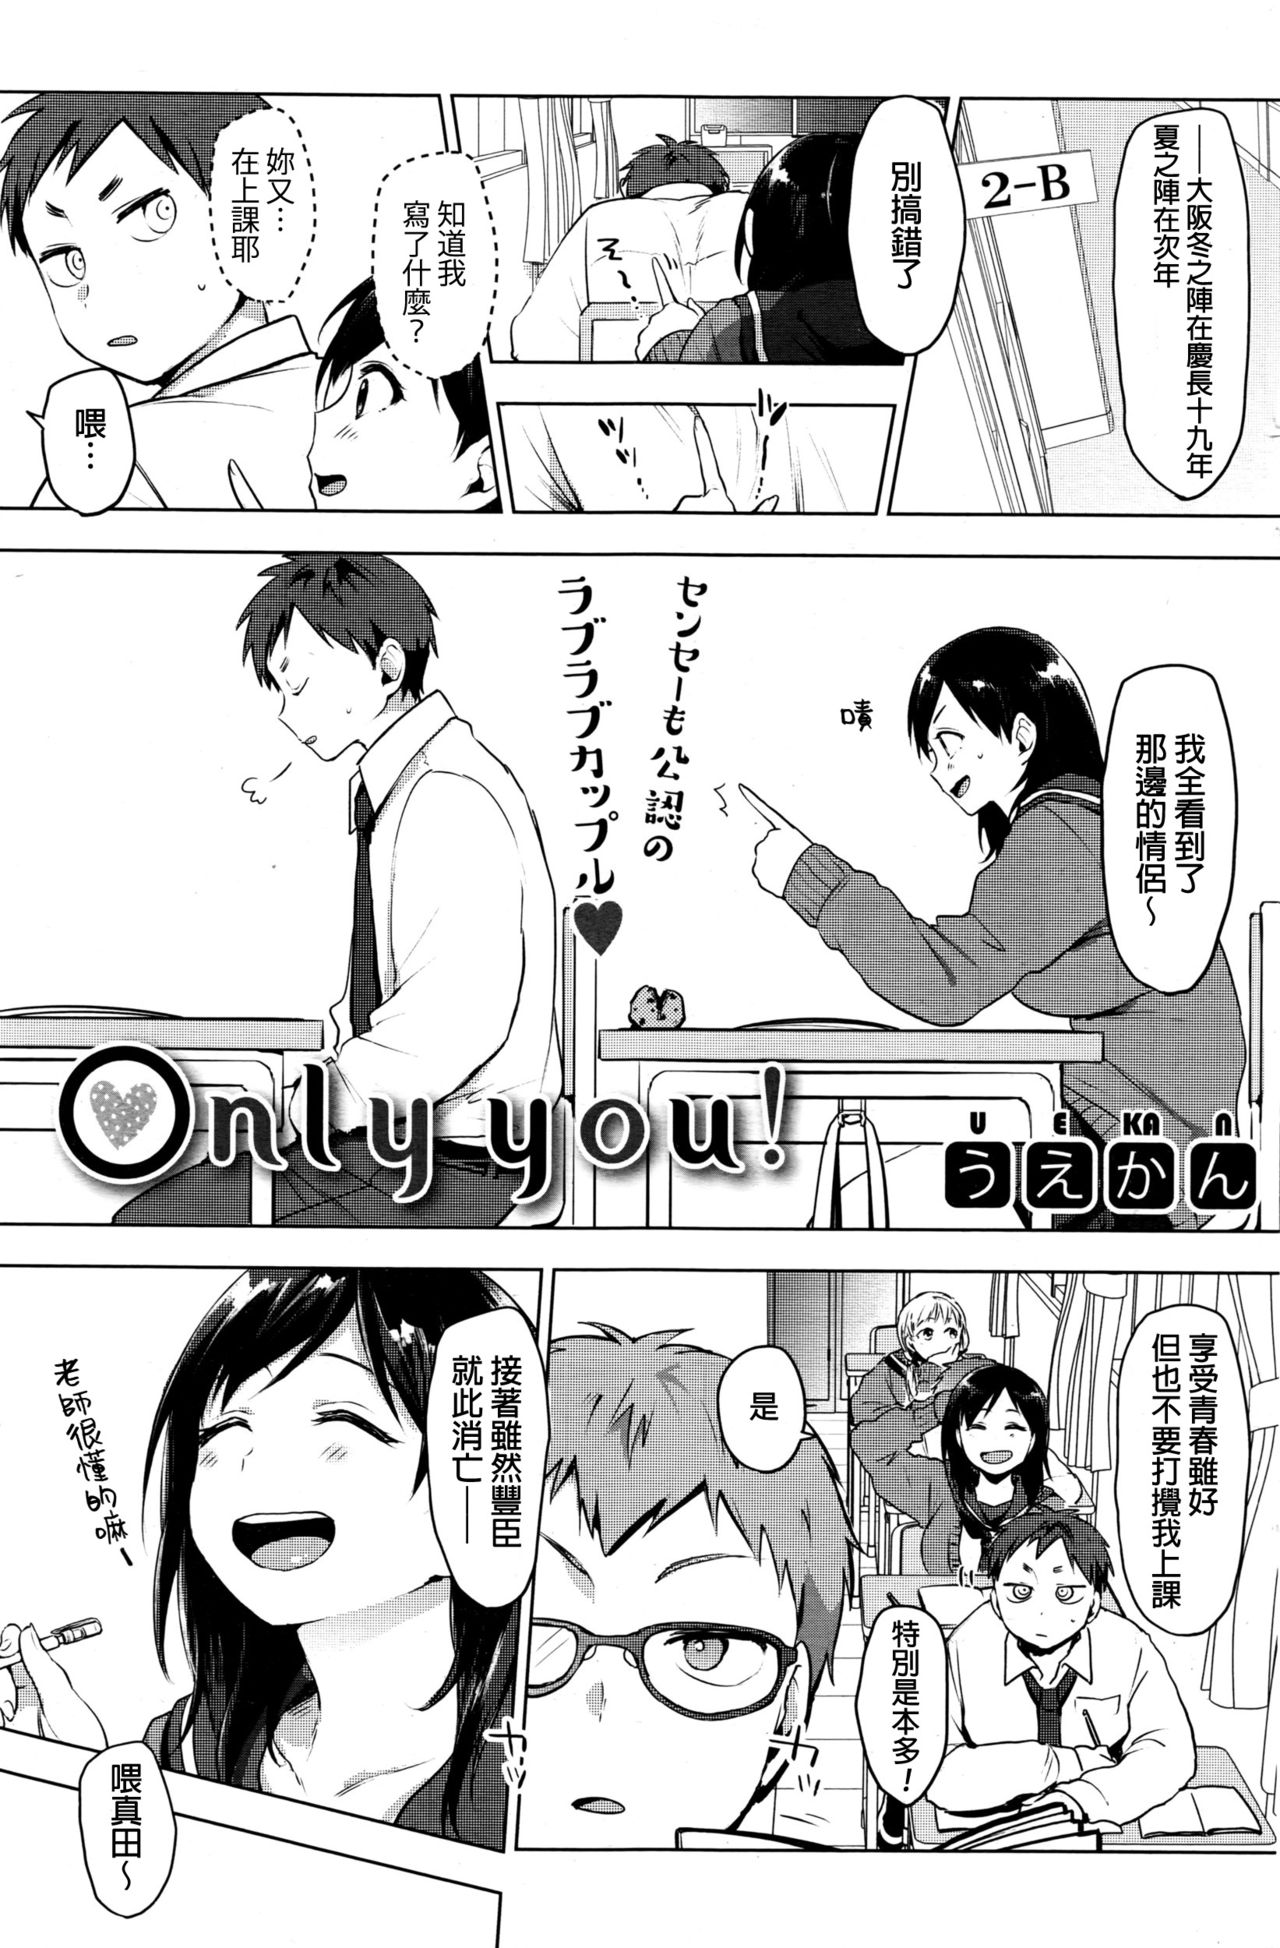 [Uekan] only you! (COMIC HOTMILK 2016-11) [Chinese] [うえかん] only you！ (コミックホットミルク 2016年11月号) [中国翻訳]